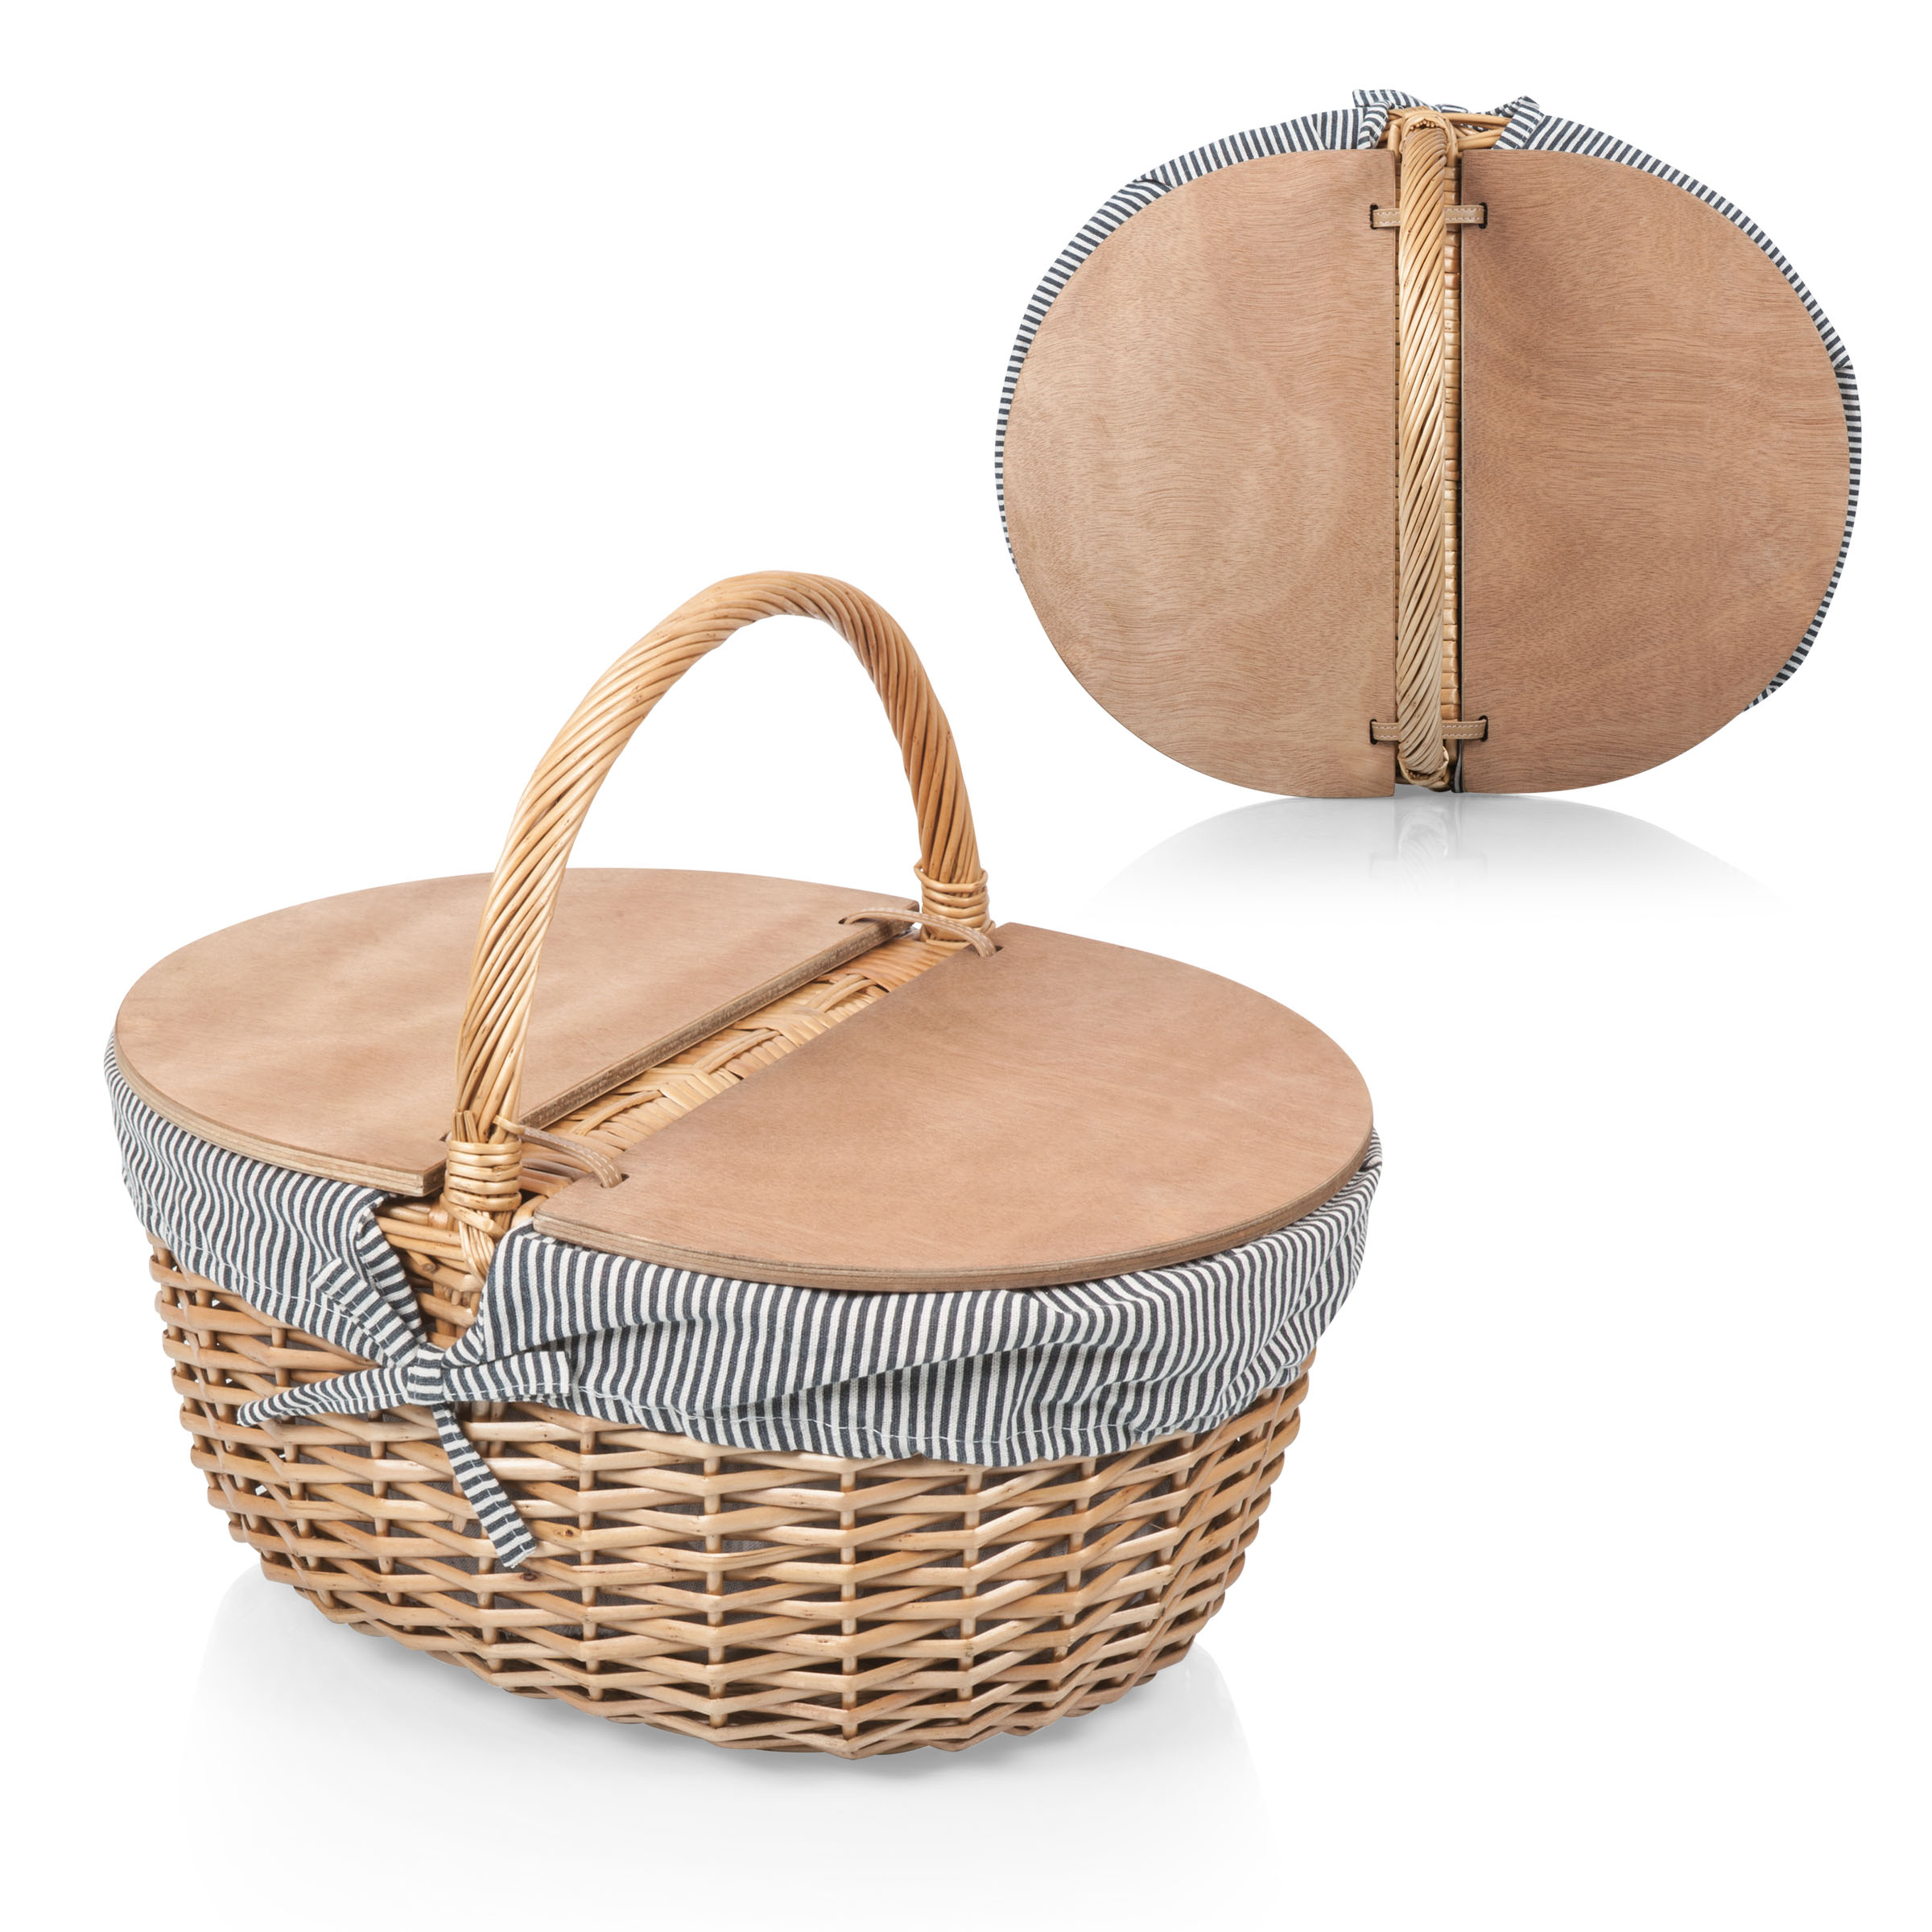 PICNIC TIME Country Picnic Basket - image 1 of 4